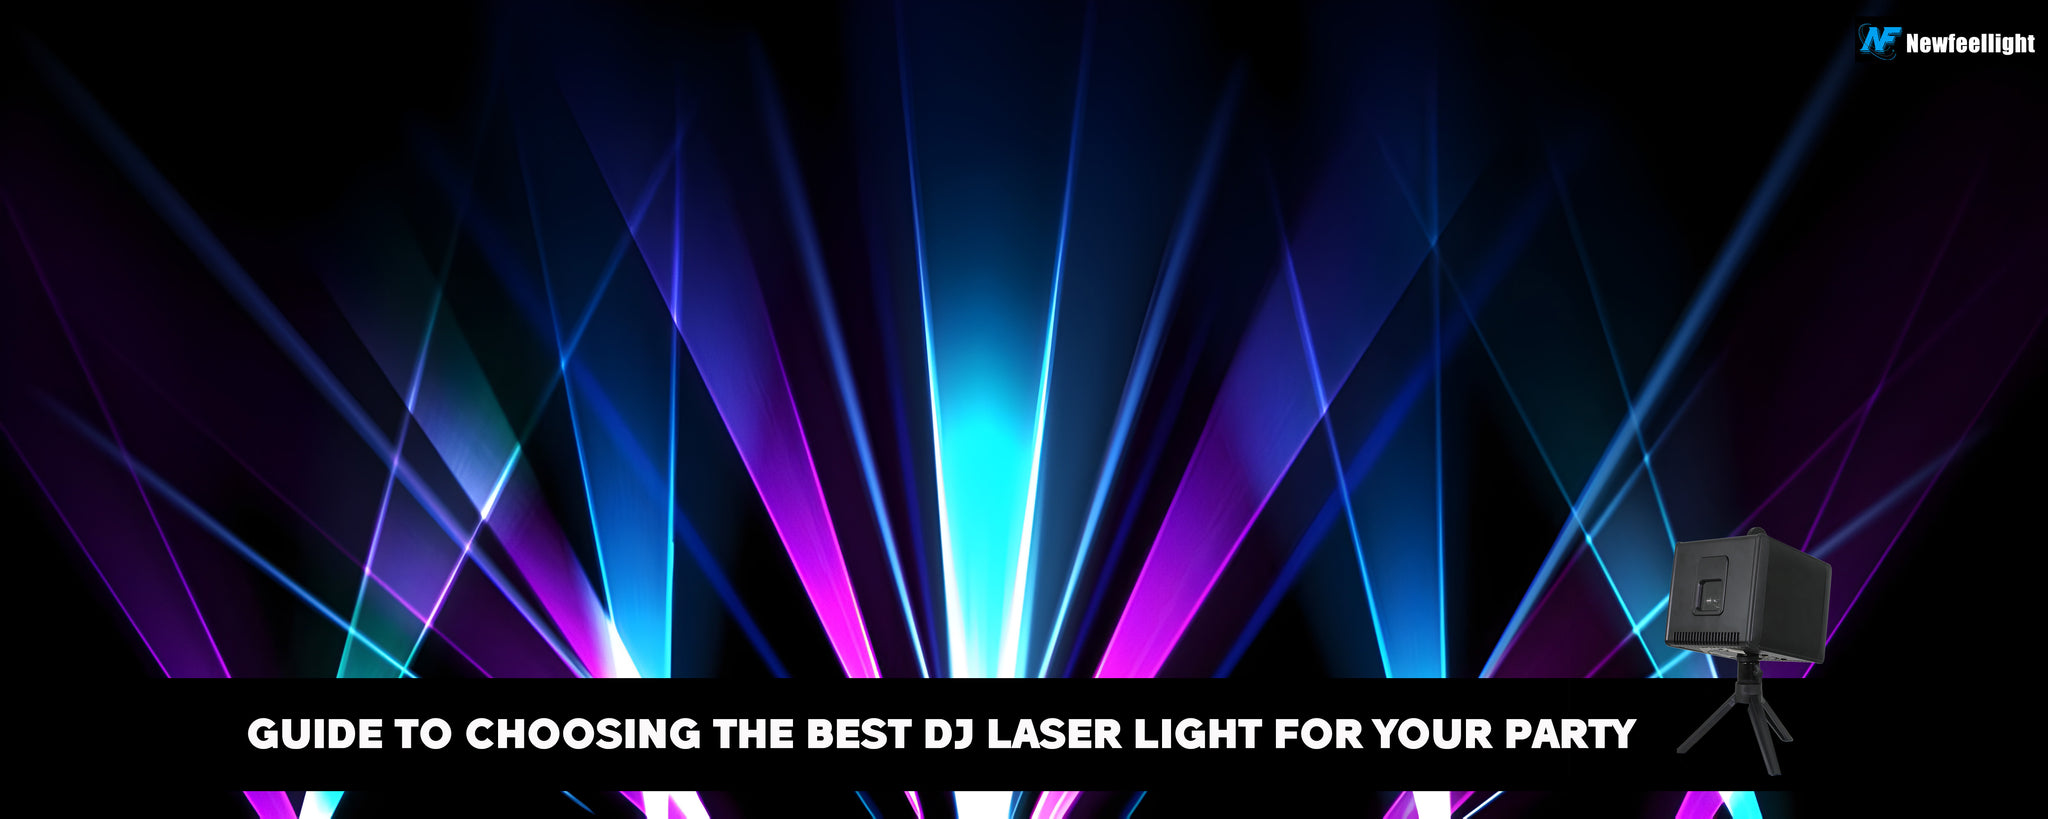 Guide to Choosing the Best DJ Laser Light for Your Party